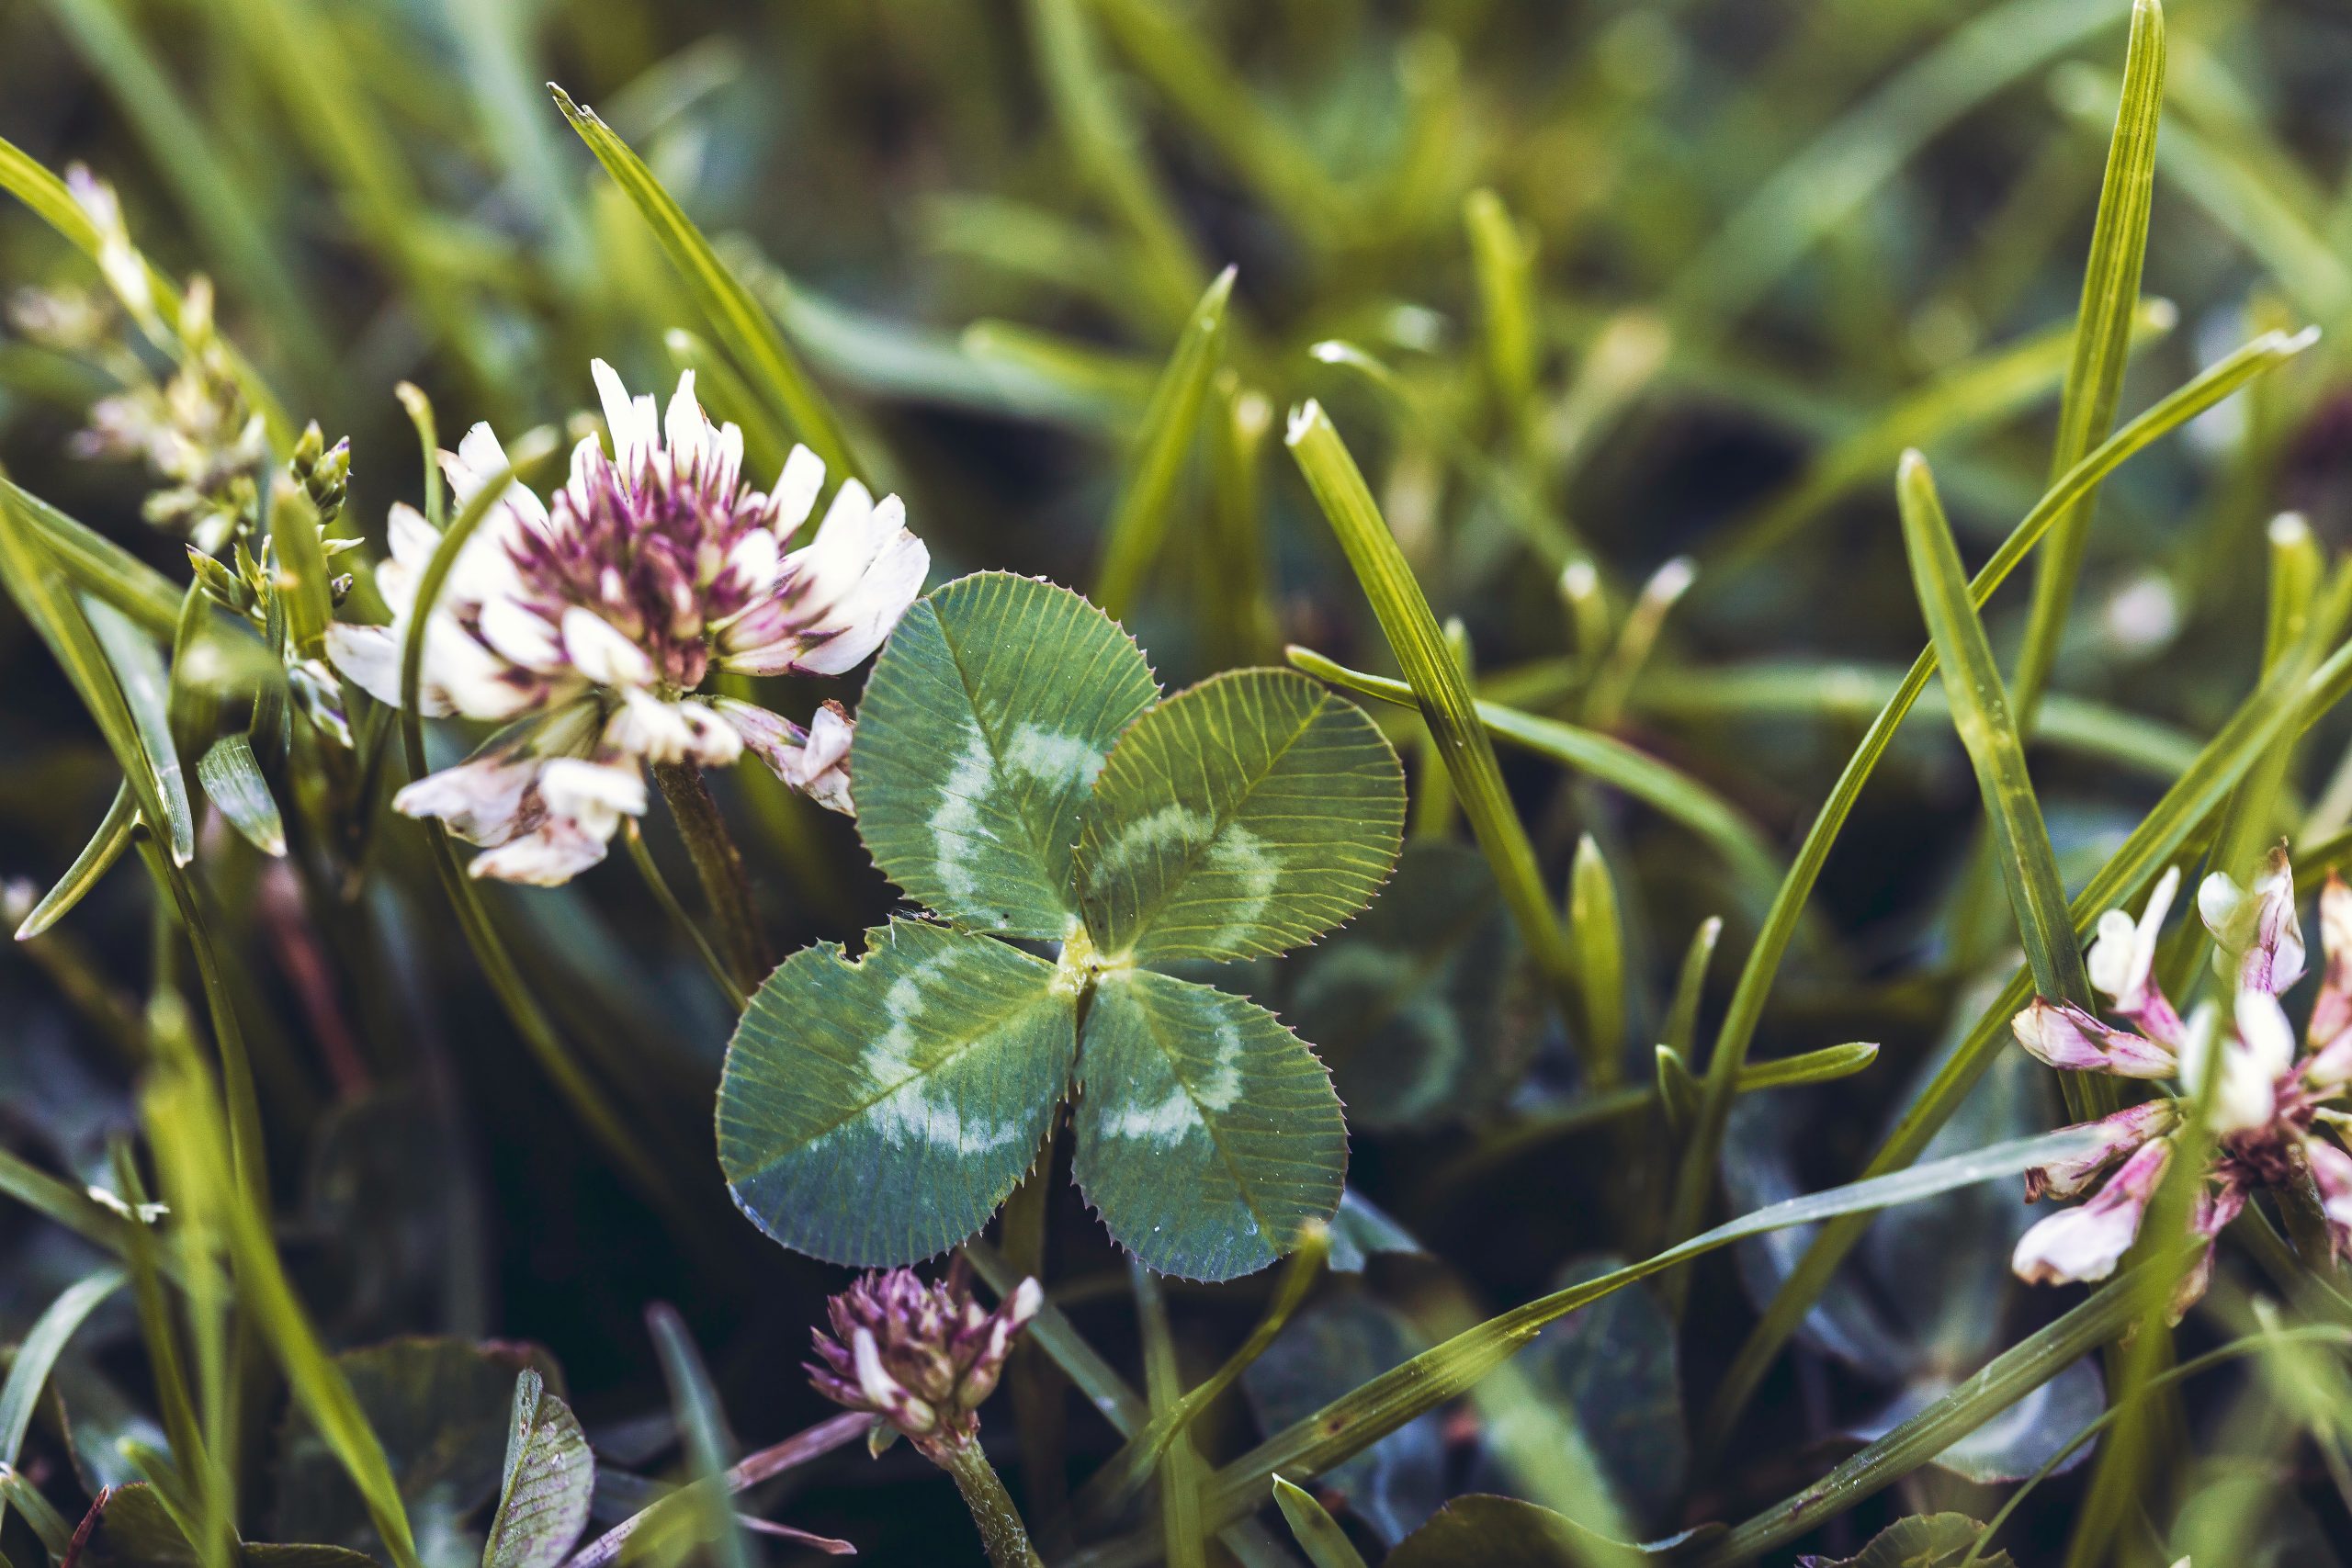 Four-Leaf Clover: The Spiritual Meaning of Finding a Four-Leaf